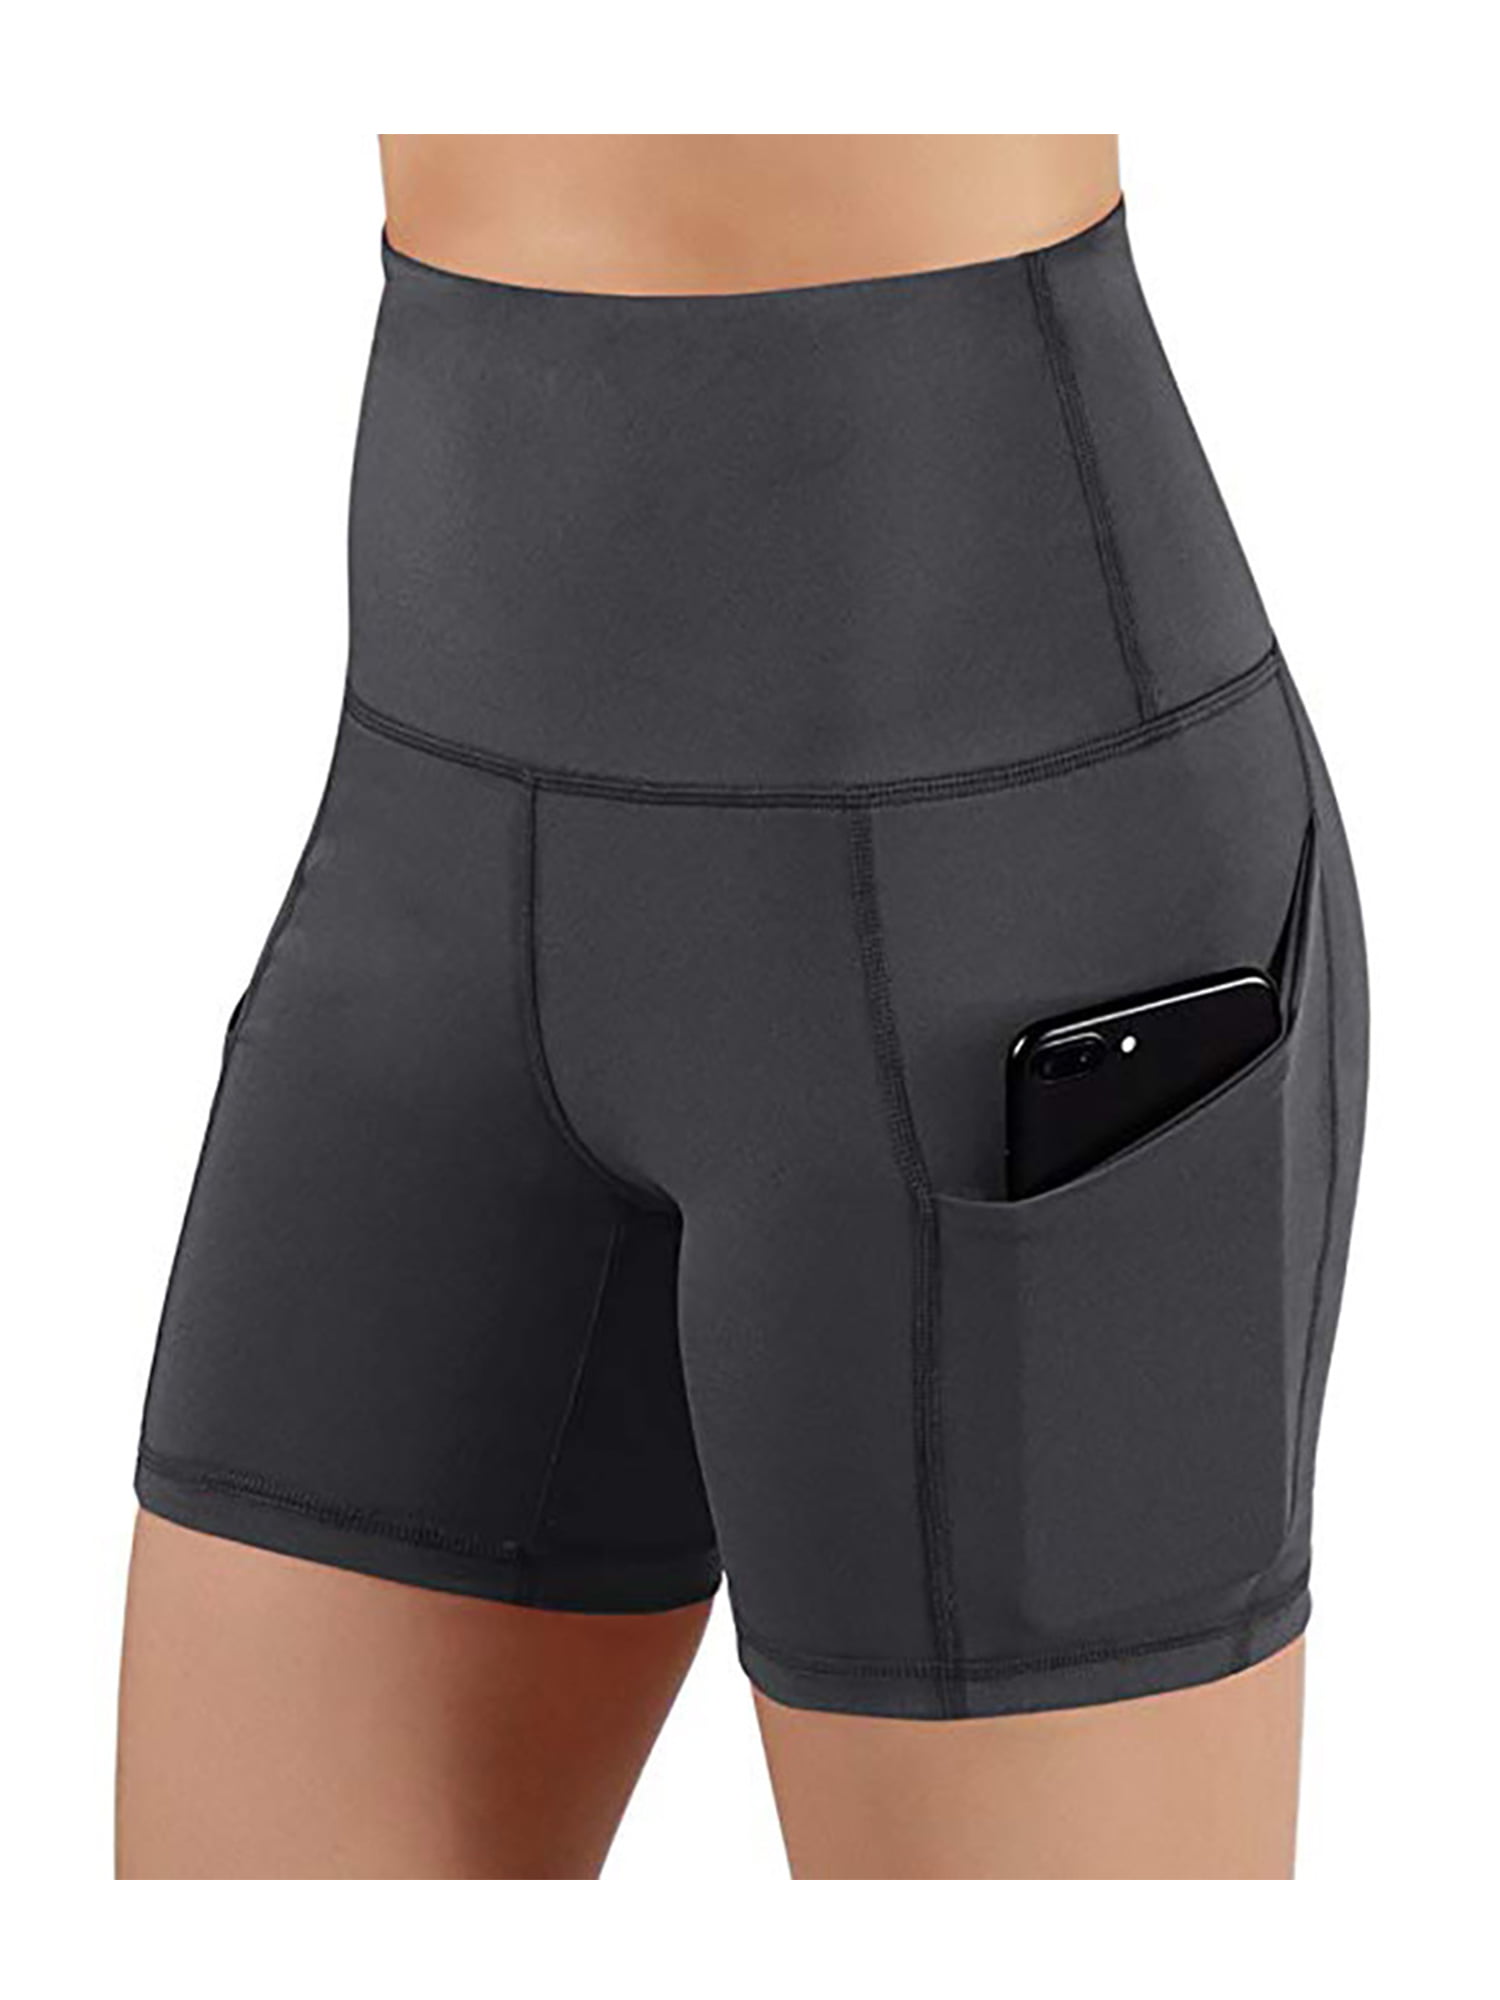 Workout Shorts Clothing For Women Activewear Yoga Shorts Gift For Female Shorts For Women Woman Clothing Gift For Her